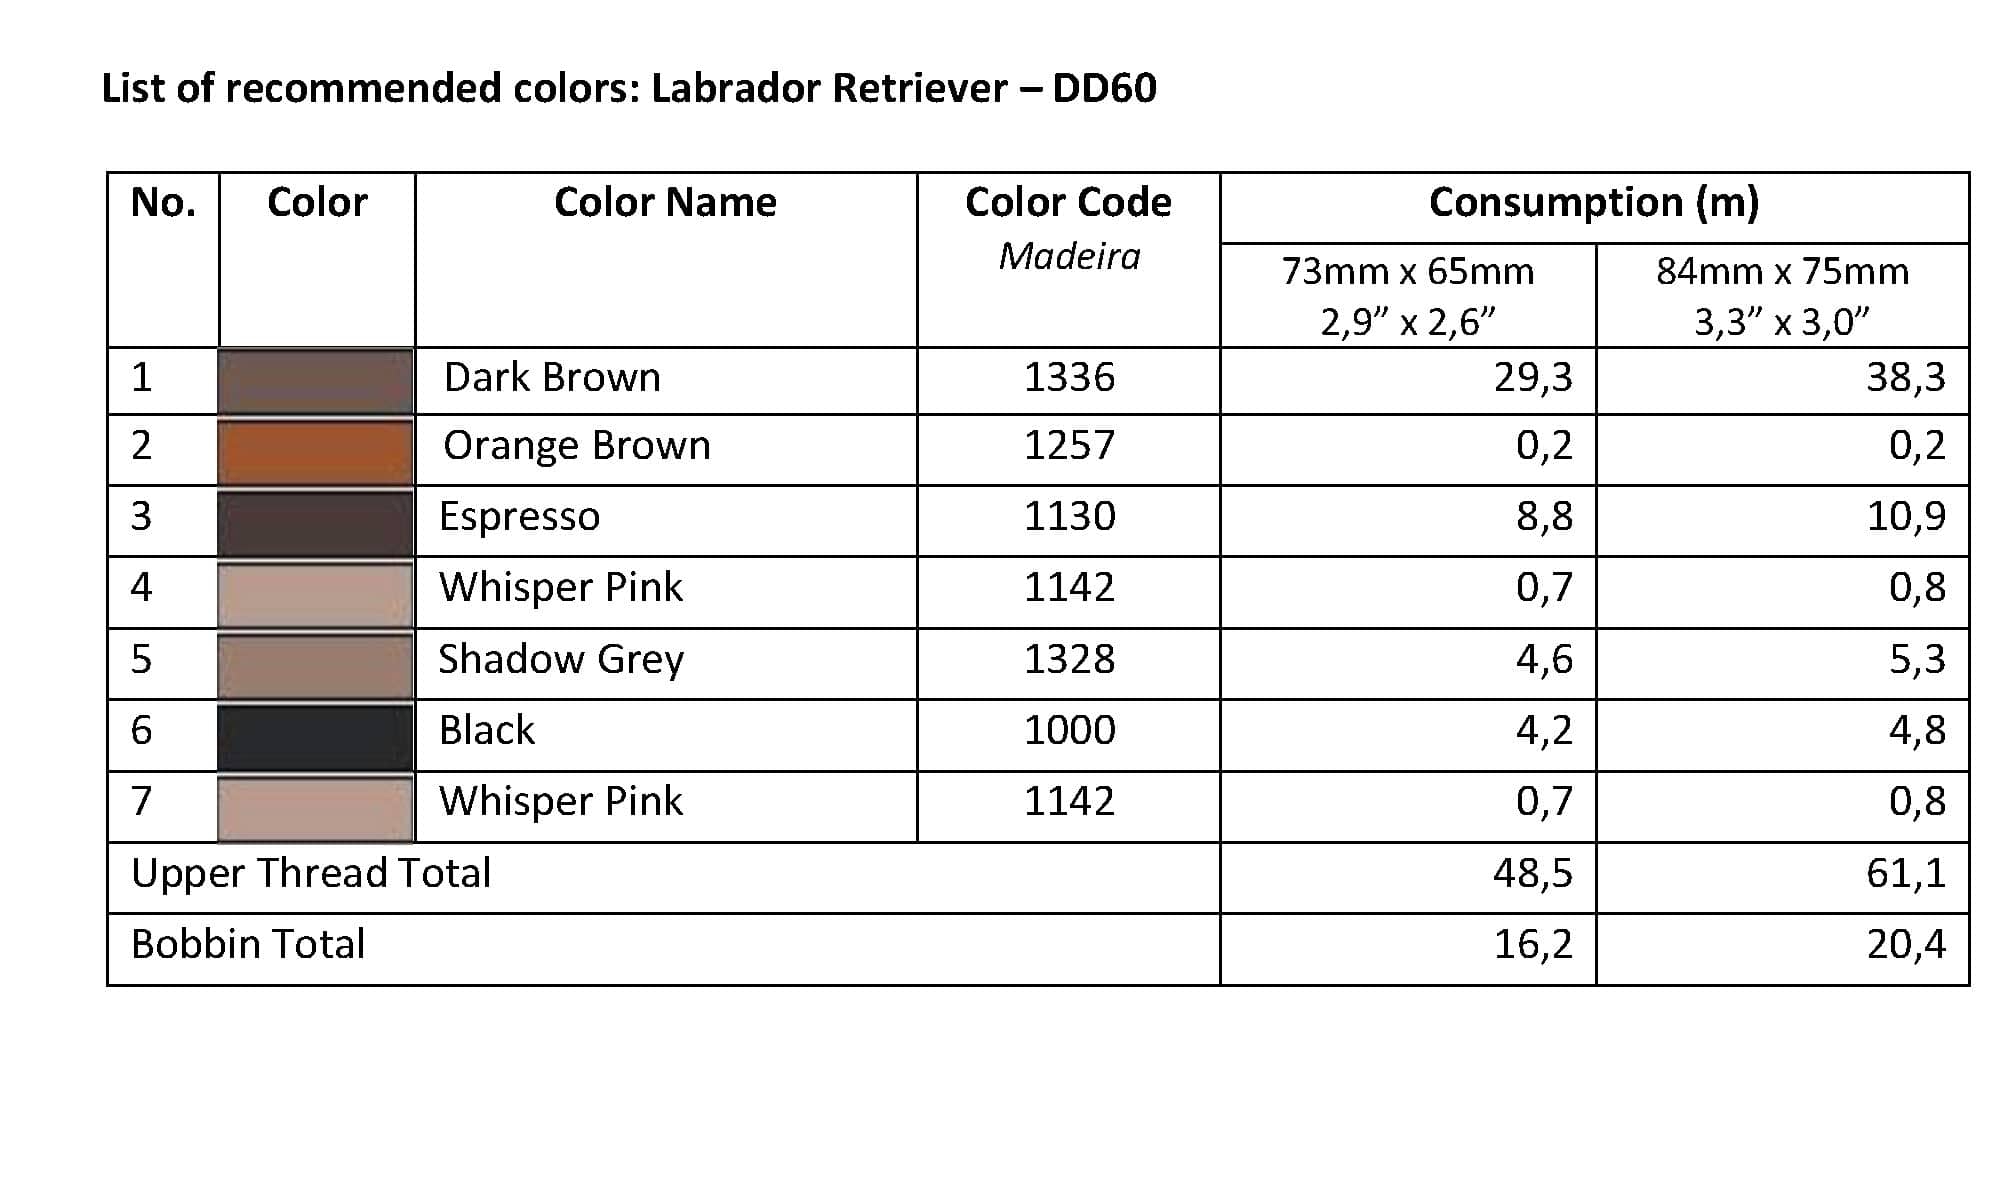 List of Recommended Colors -Labrador Retriever DD60